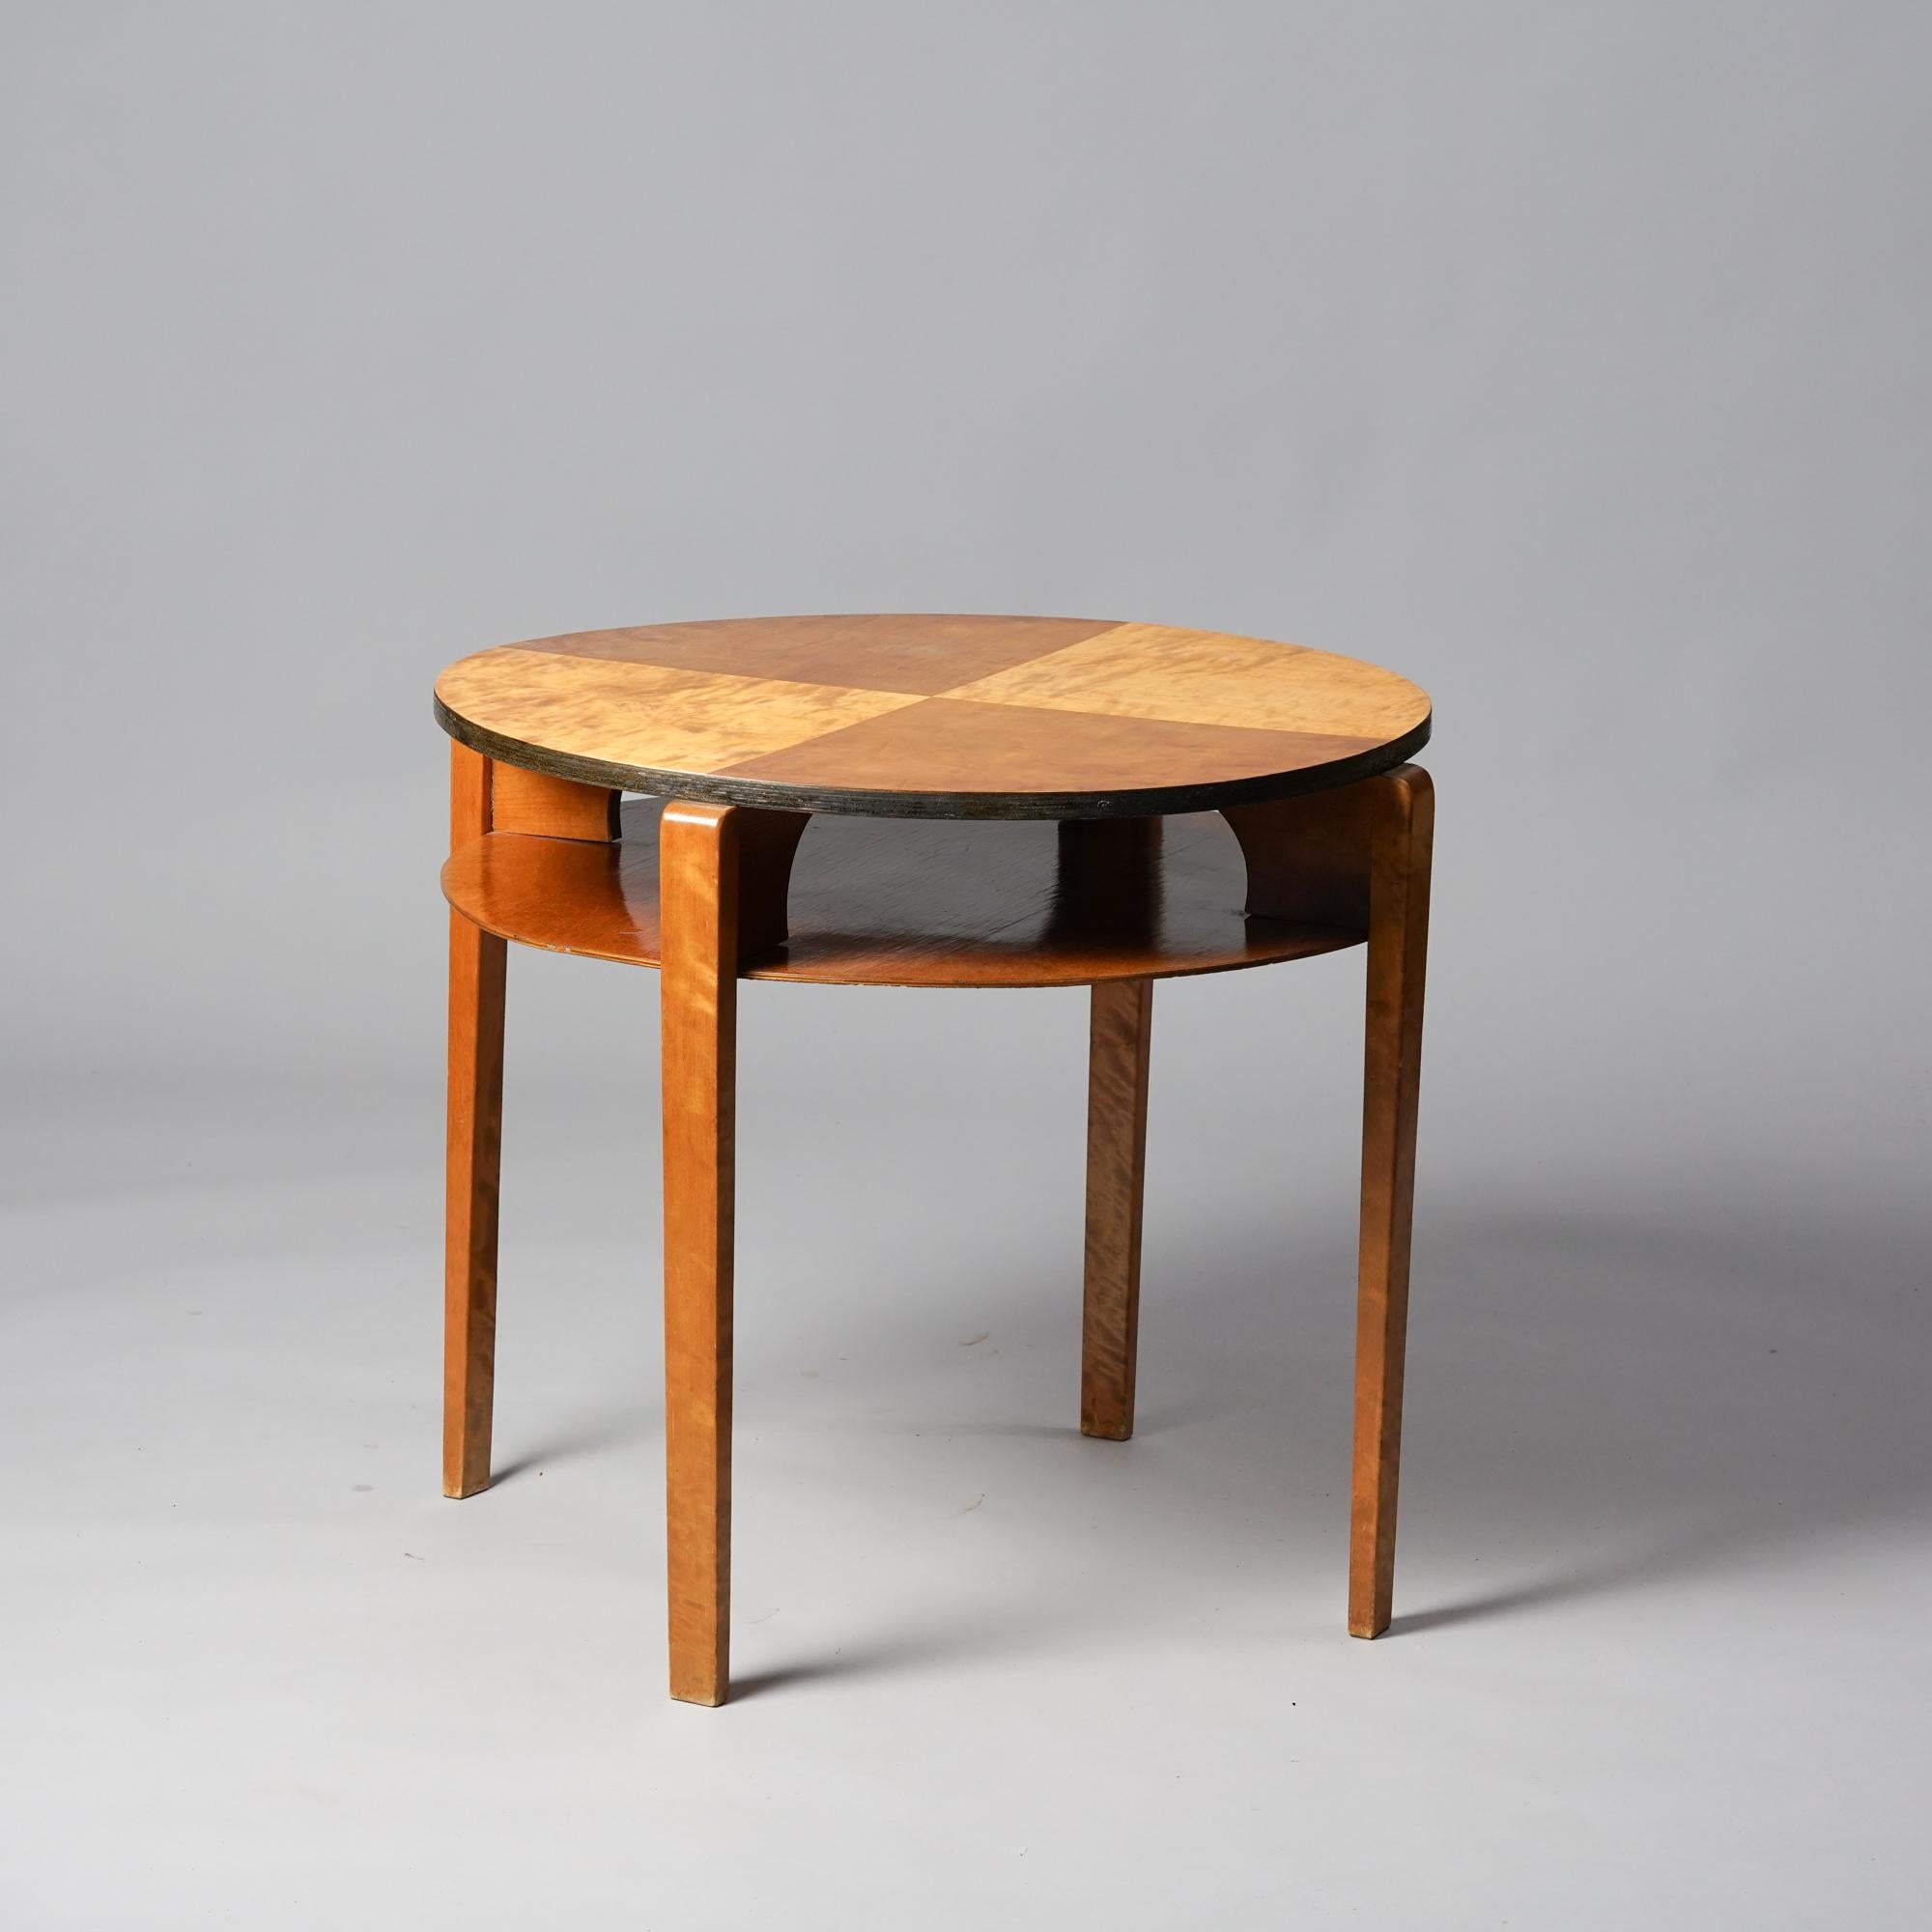 A rare coffee table designed by Ilmari Tapiovaara in 1940s. Manufactured by Keravan Puuteollisuus. Coffee table is made from birch. Wear consistent with age and use. 